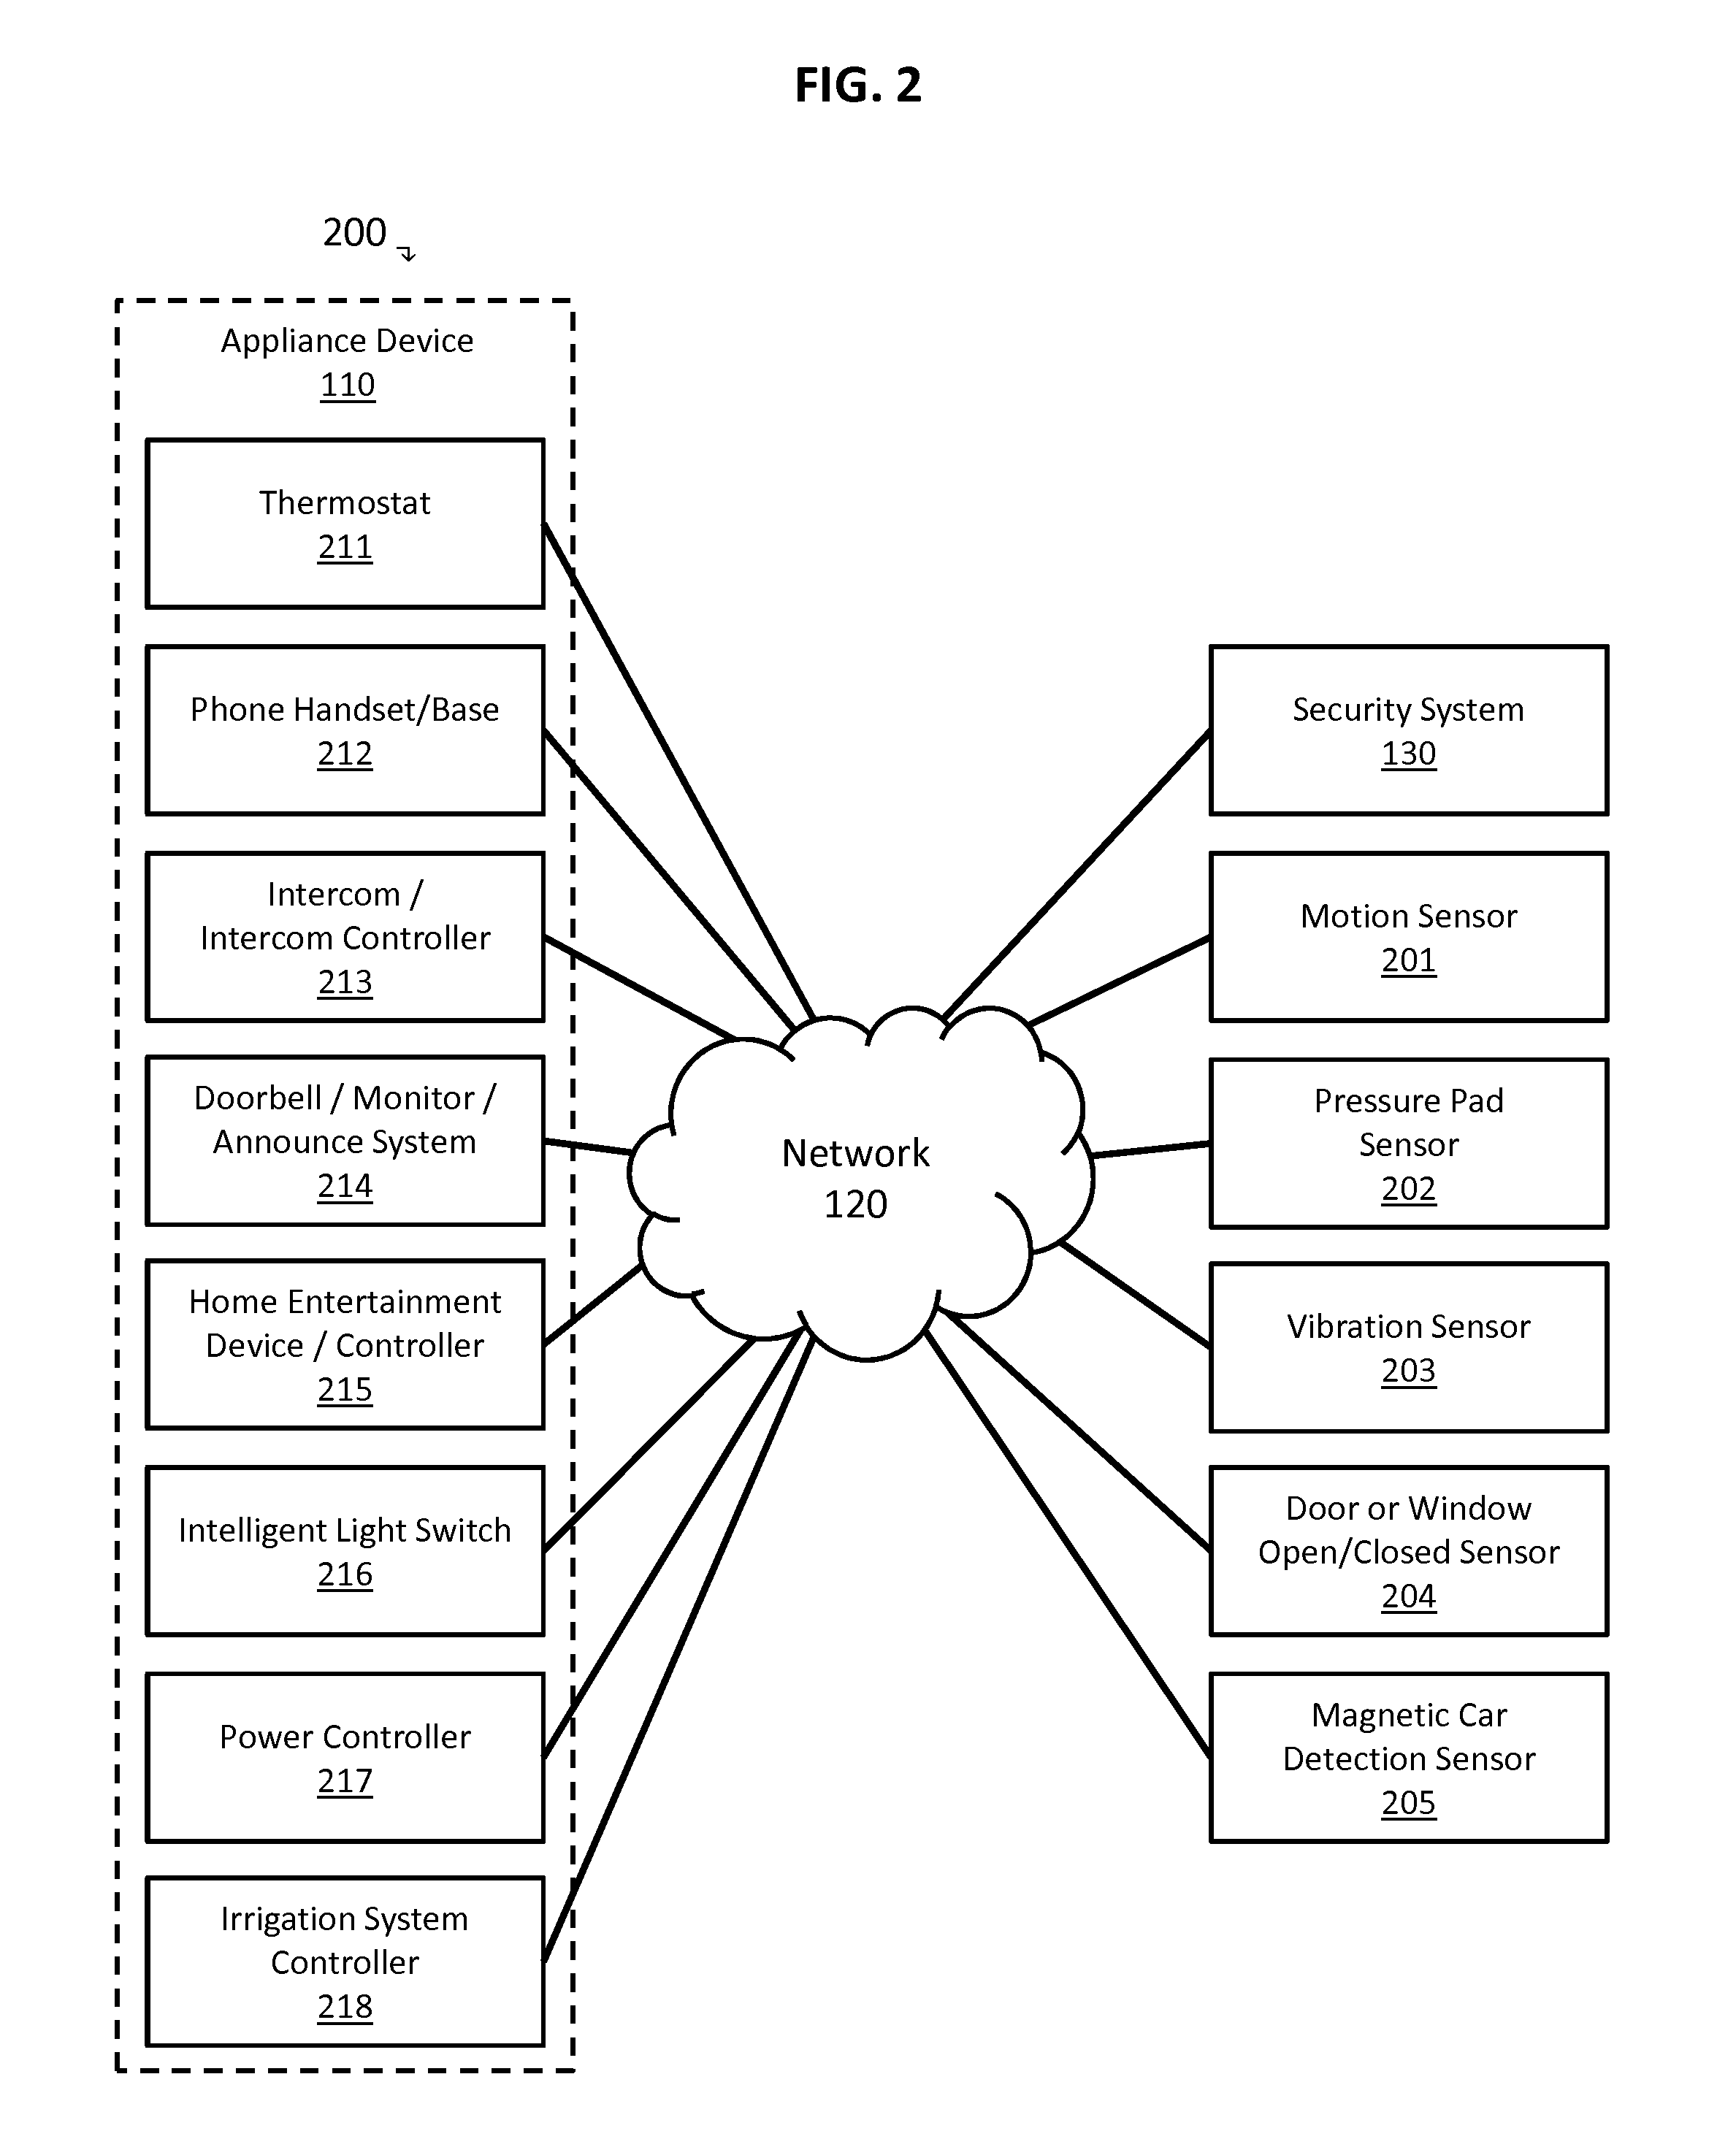 Appliance Device Integration with Alarm Systems